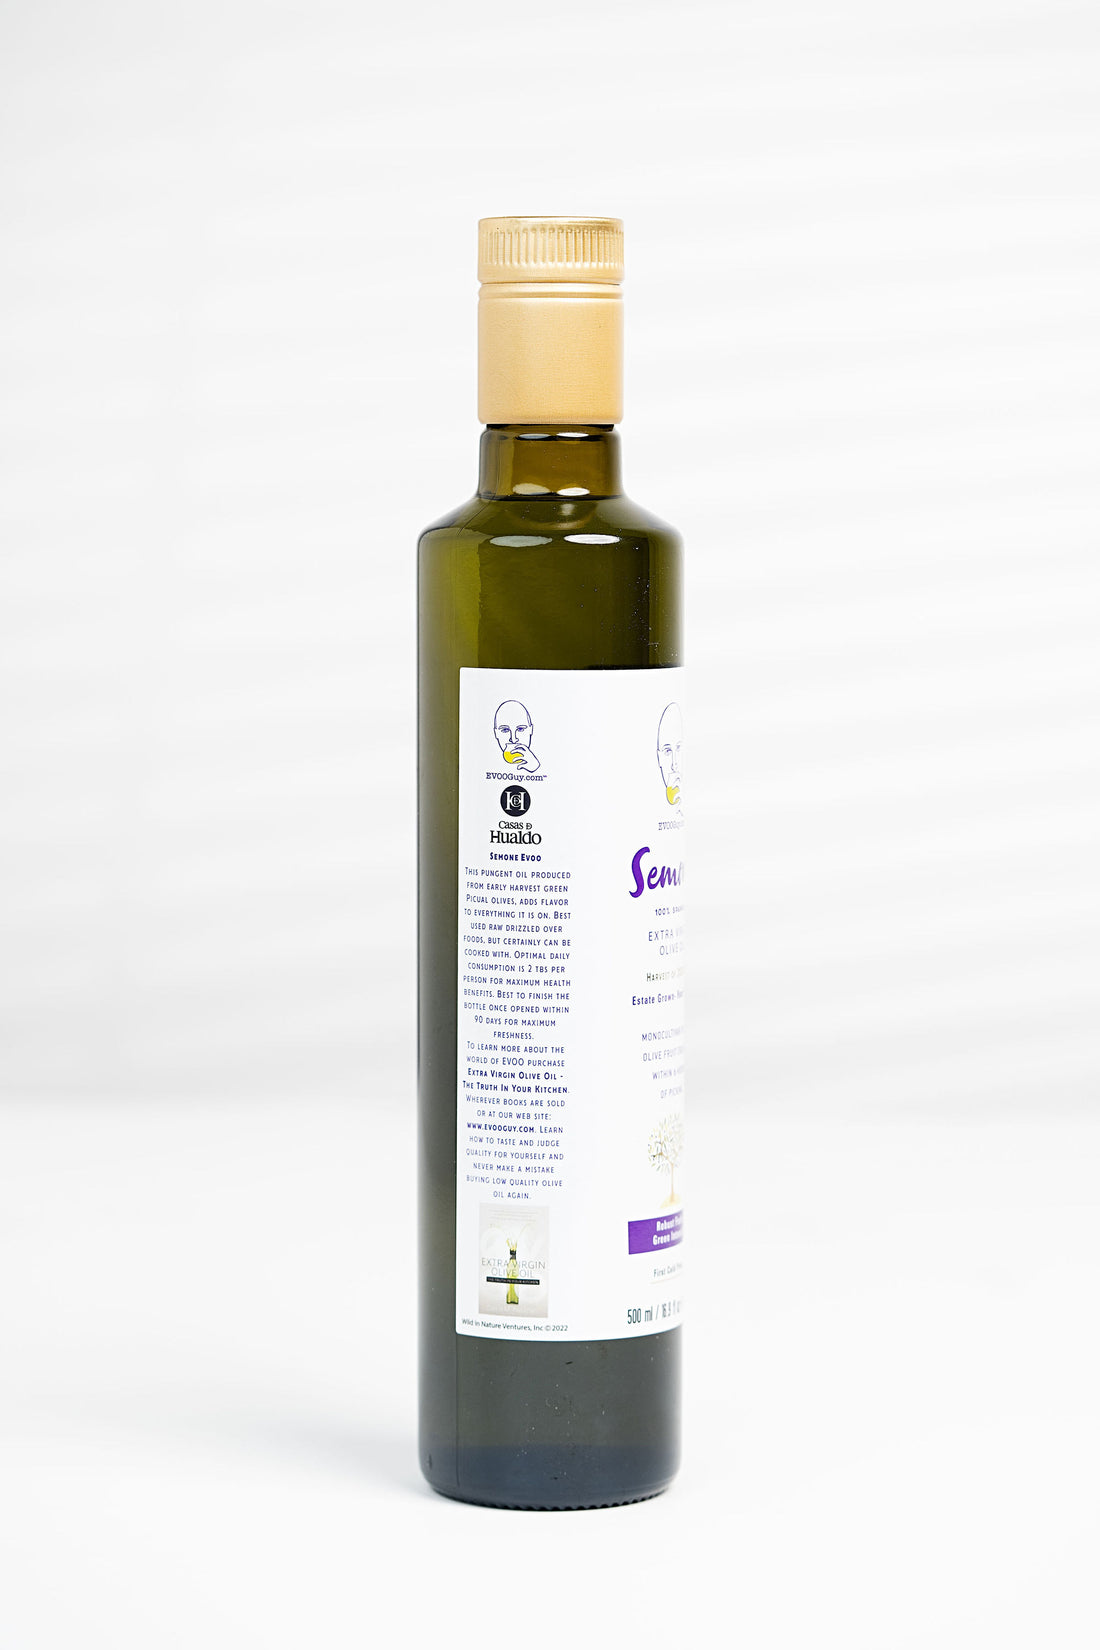 A EVOOGuy.com(R) 2023/2024 New Harvest Semone Extra Virgin Olive Oil- Premium- JUST ARRIVED- 100% Spanish Picual - 1 bottle (500ml)